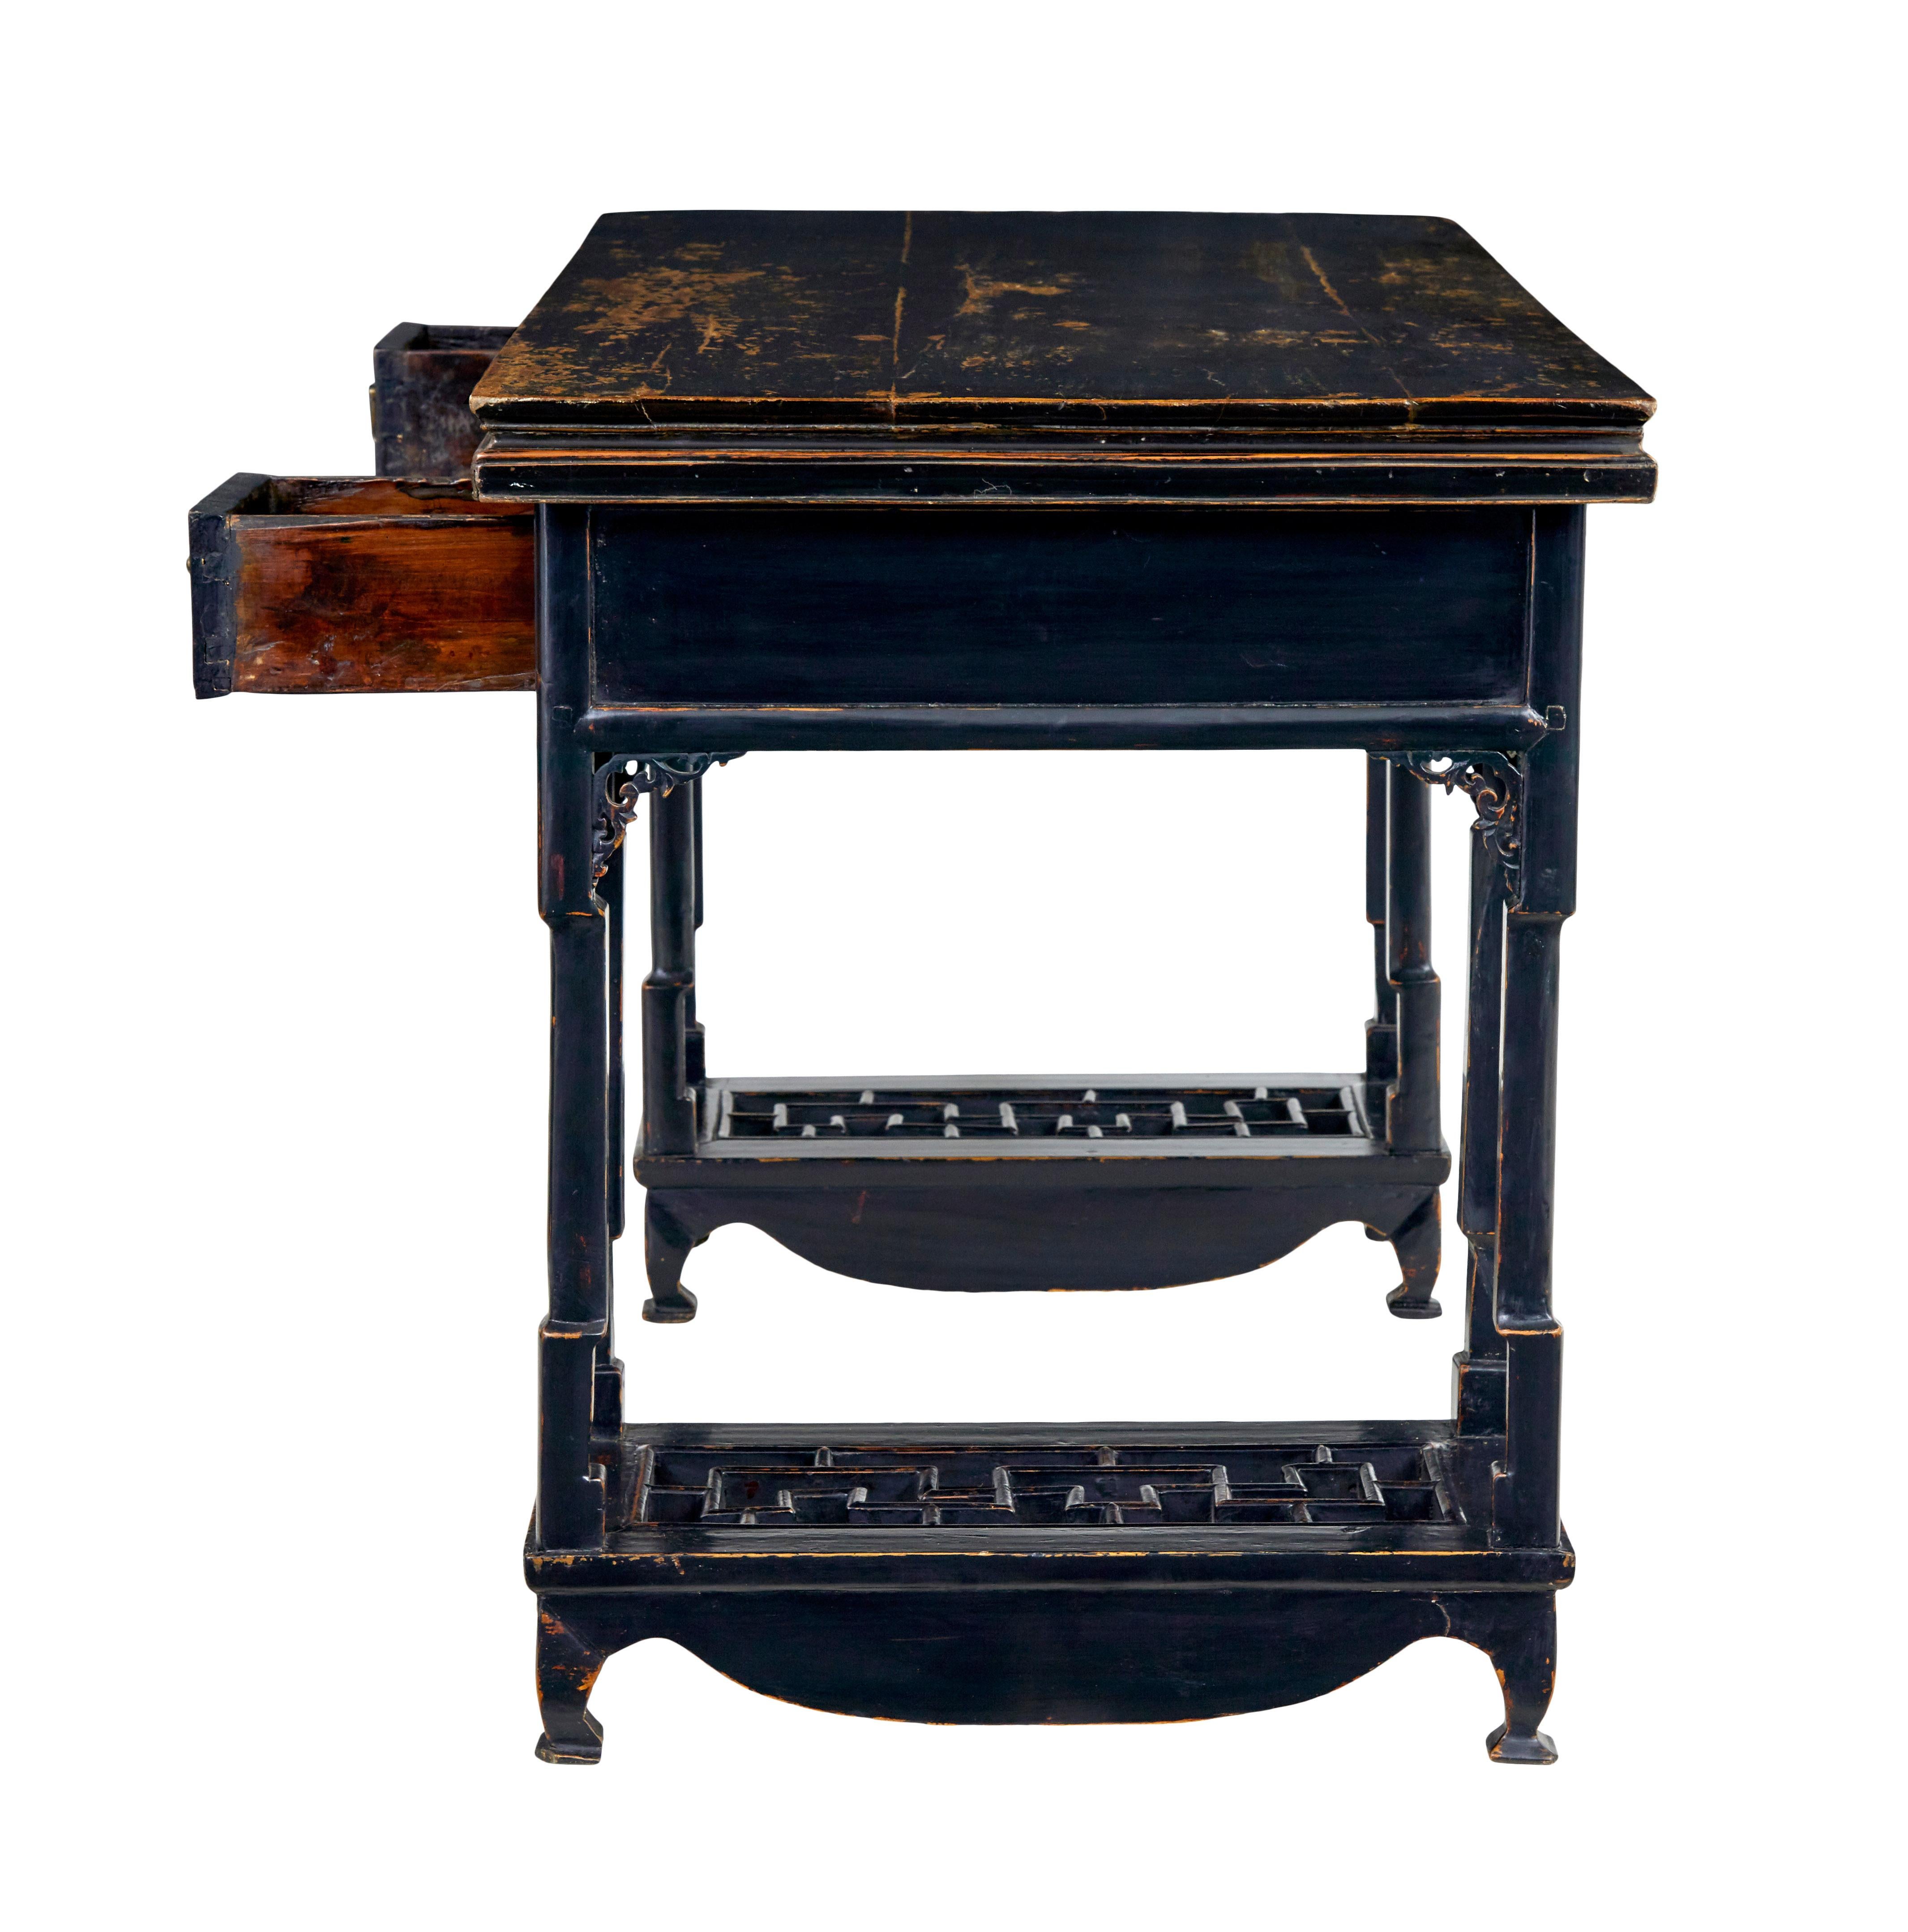 19th century Chinese black lacquered desk 1